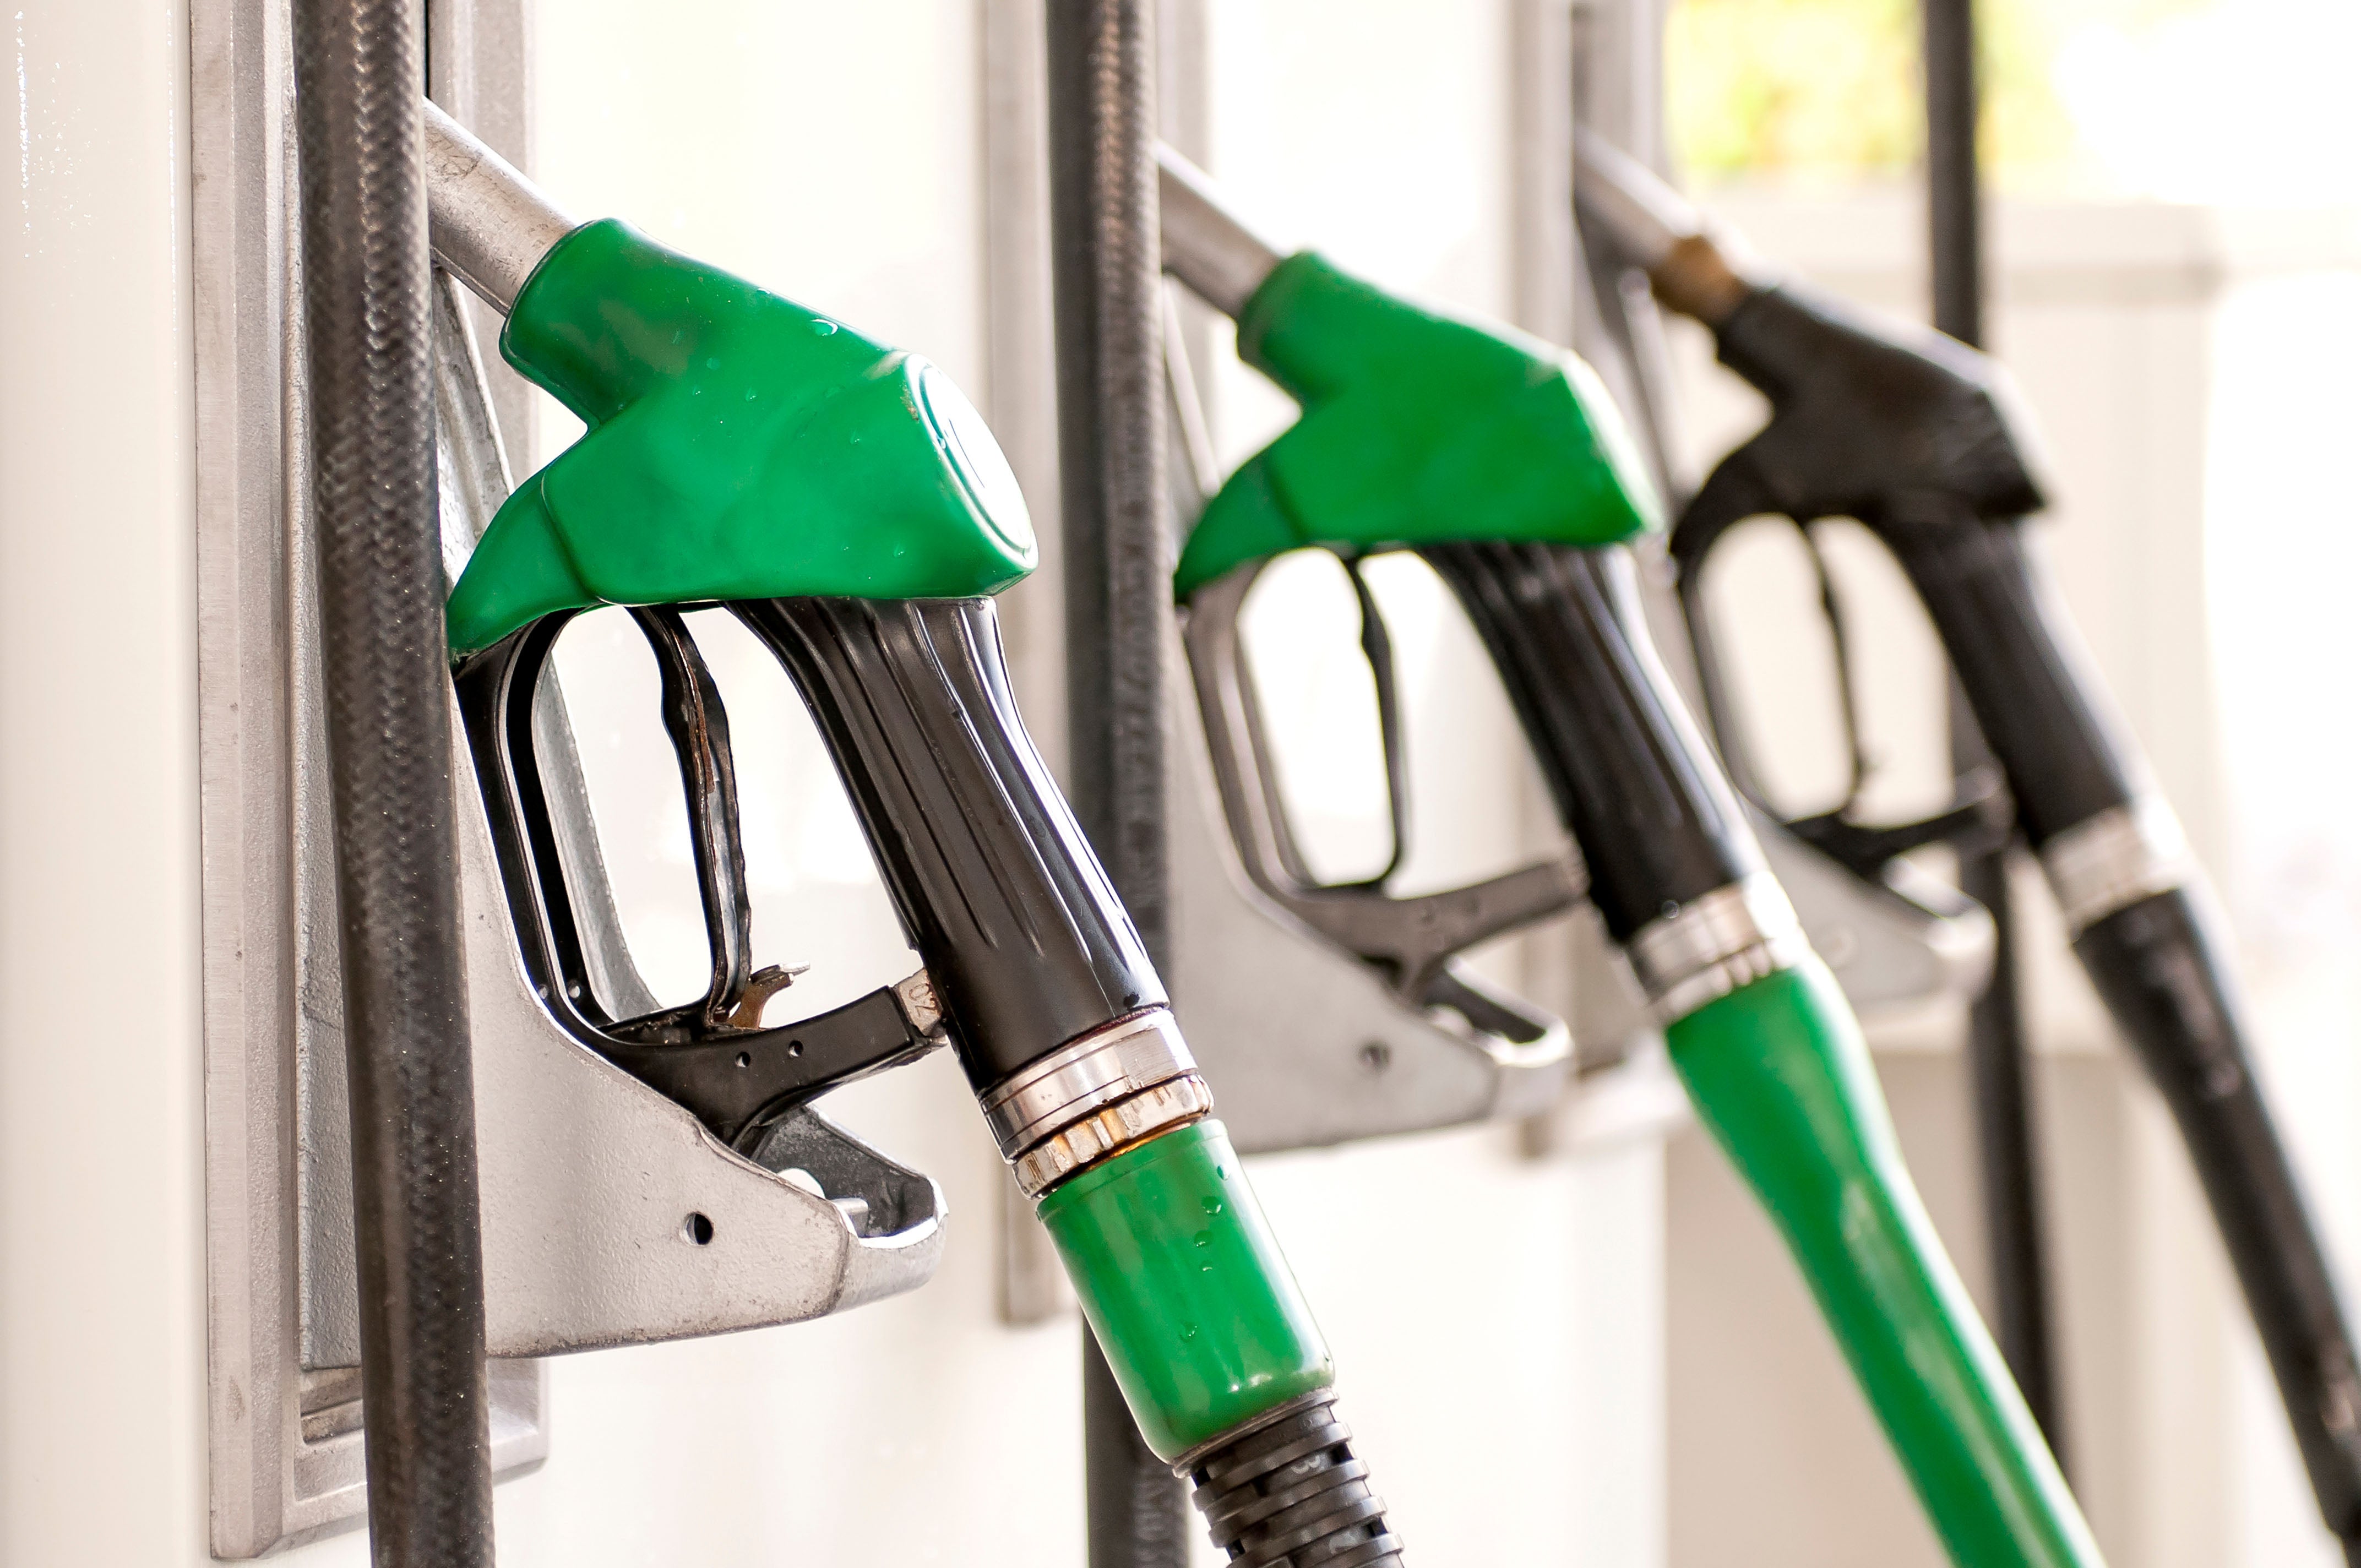 Asda said it has cut the cost of unleaded by 5p per litre and diesel by 3p per litre (Alamy/PA)